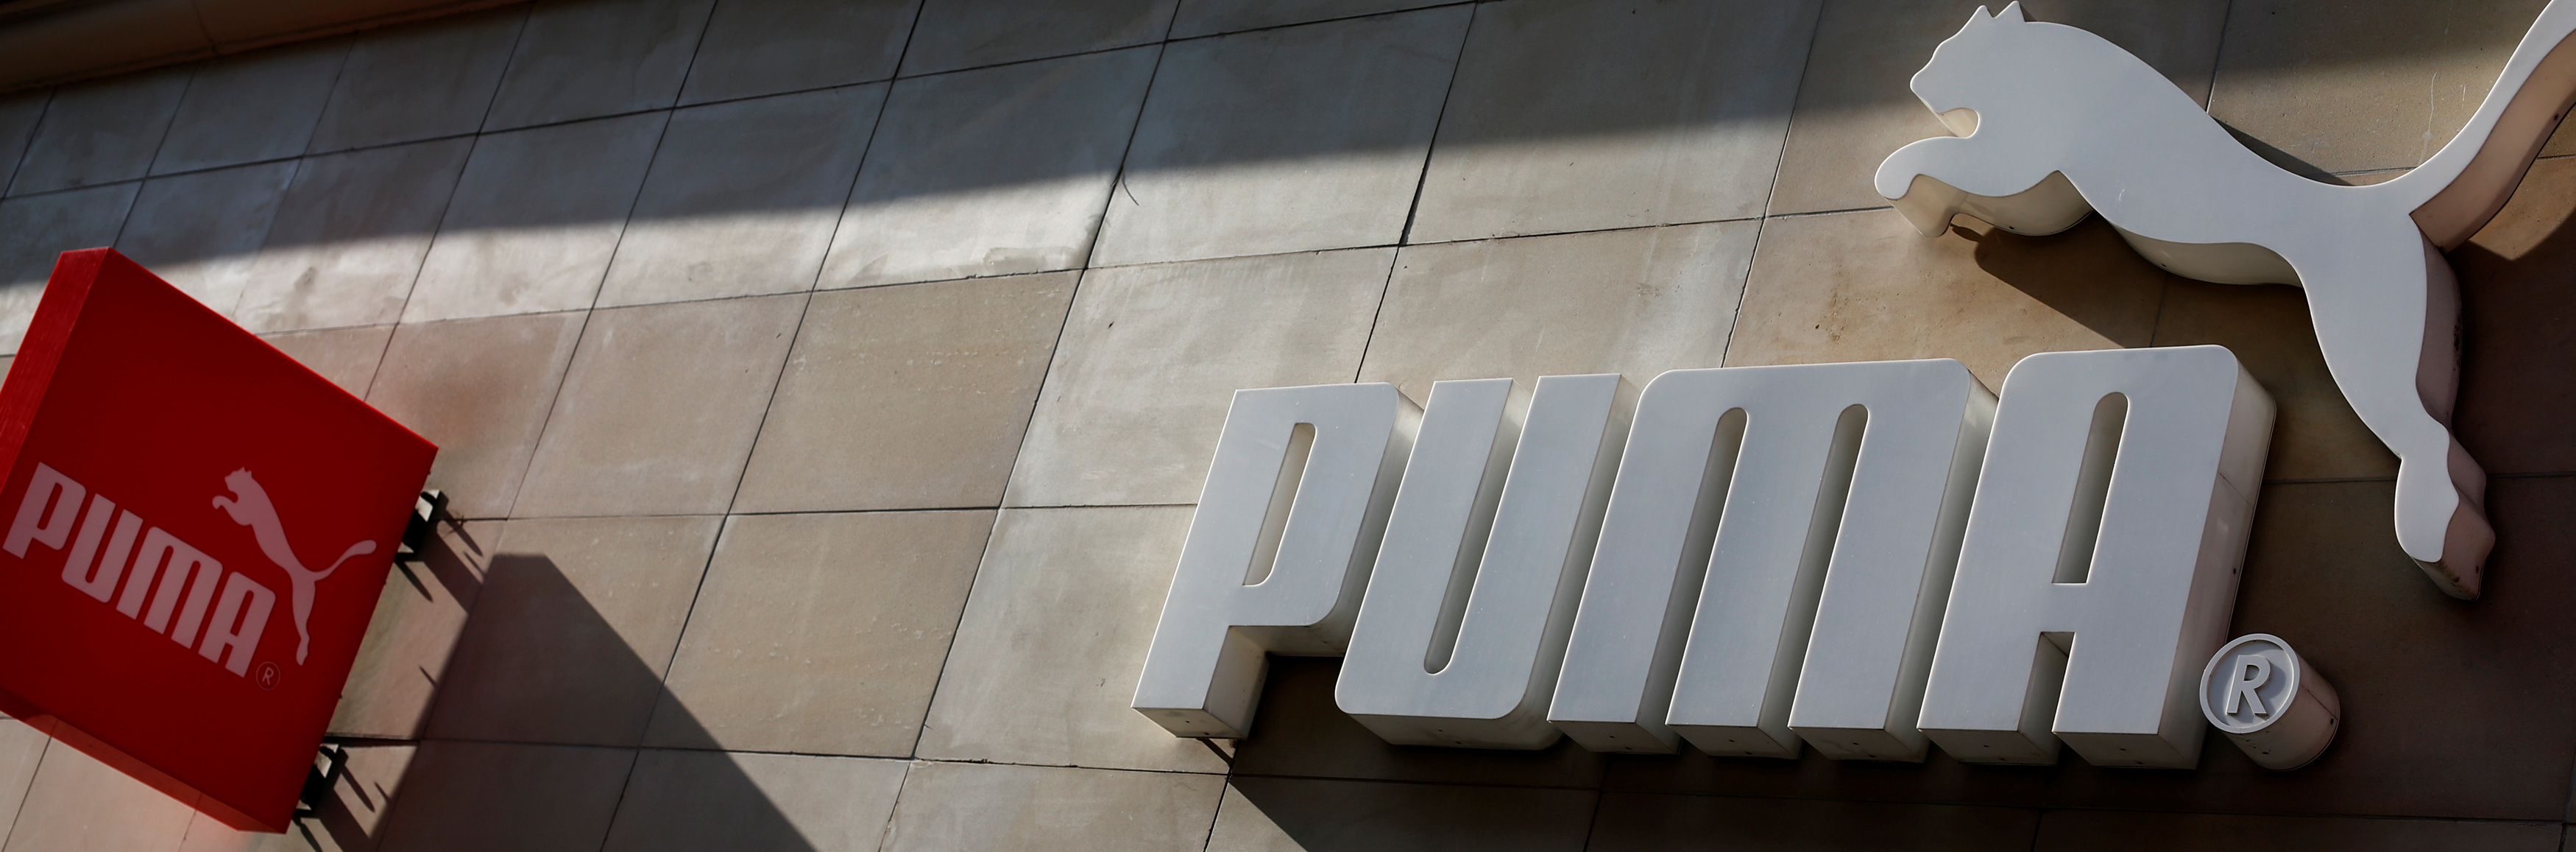 The logo of German sports goods firm Puma is seen at the entrance of one of its stores in Vienna